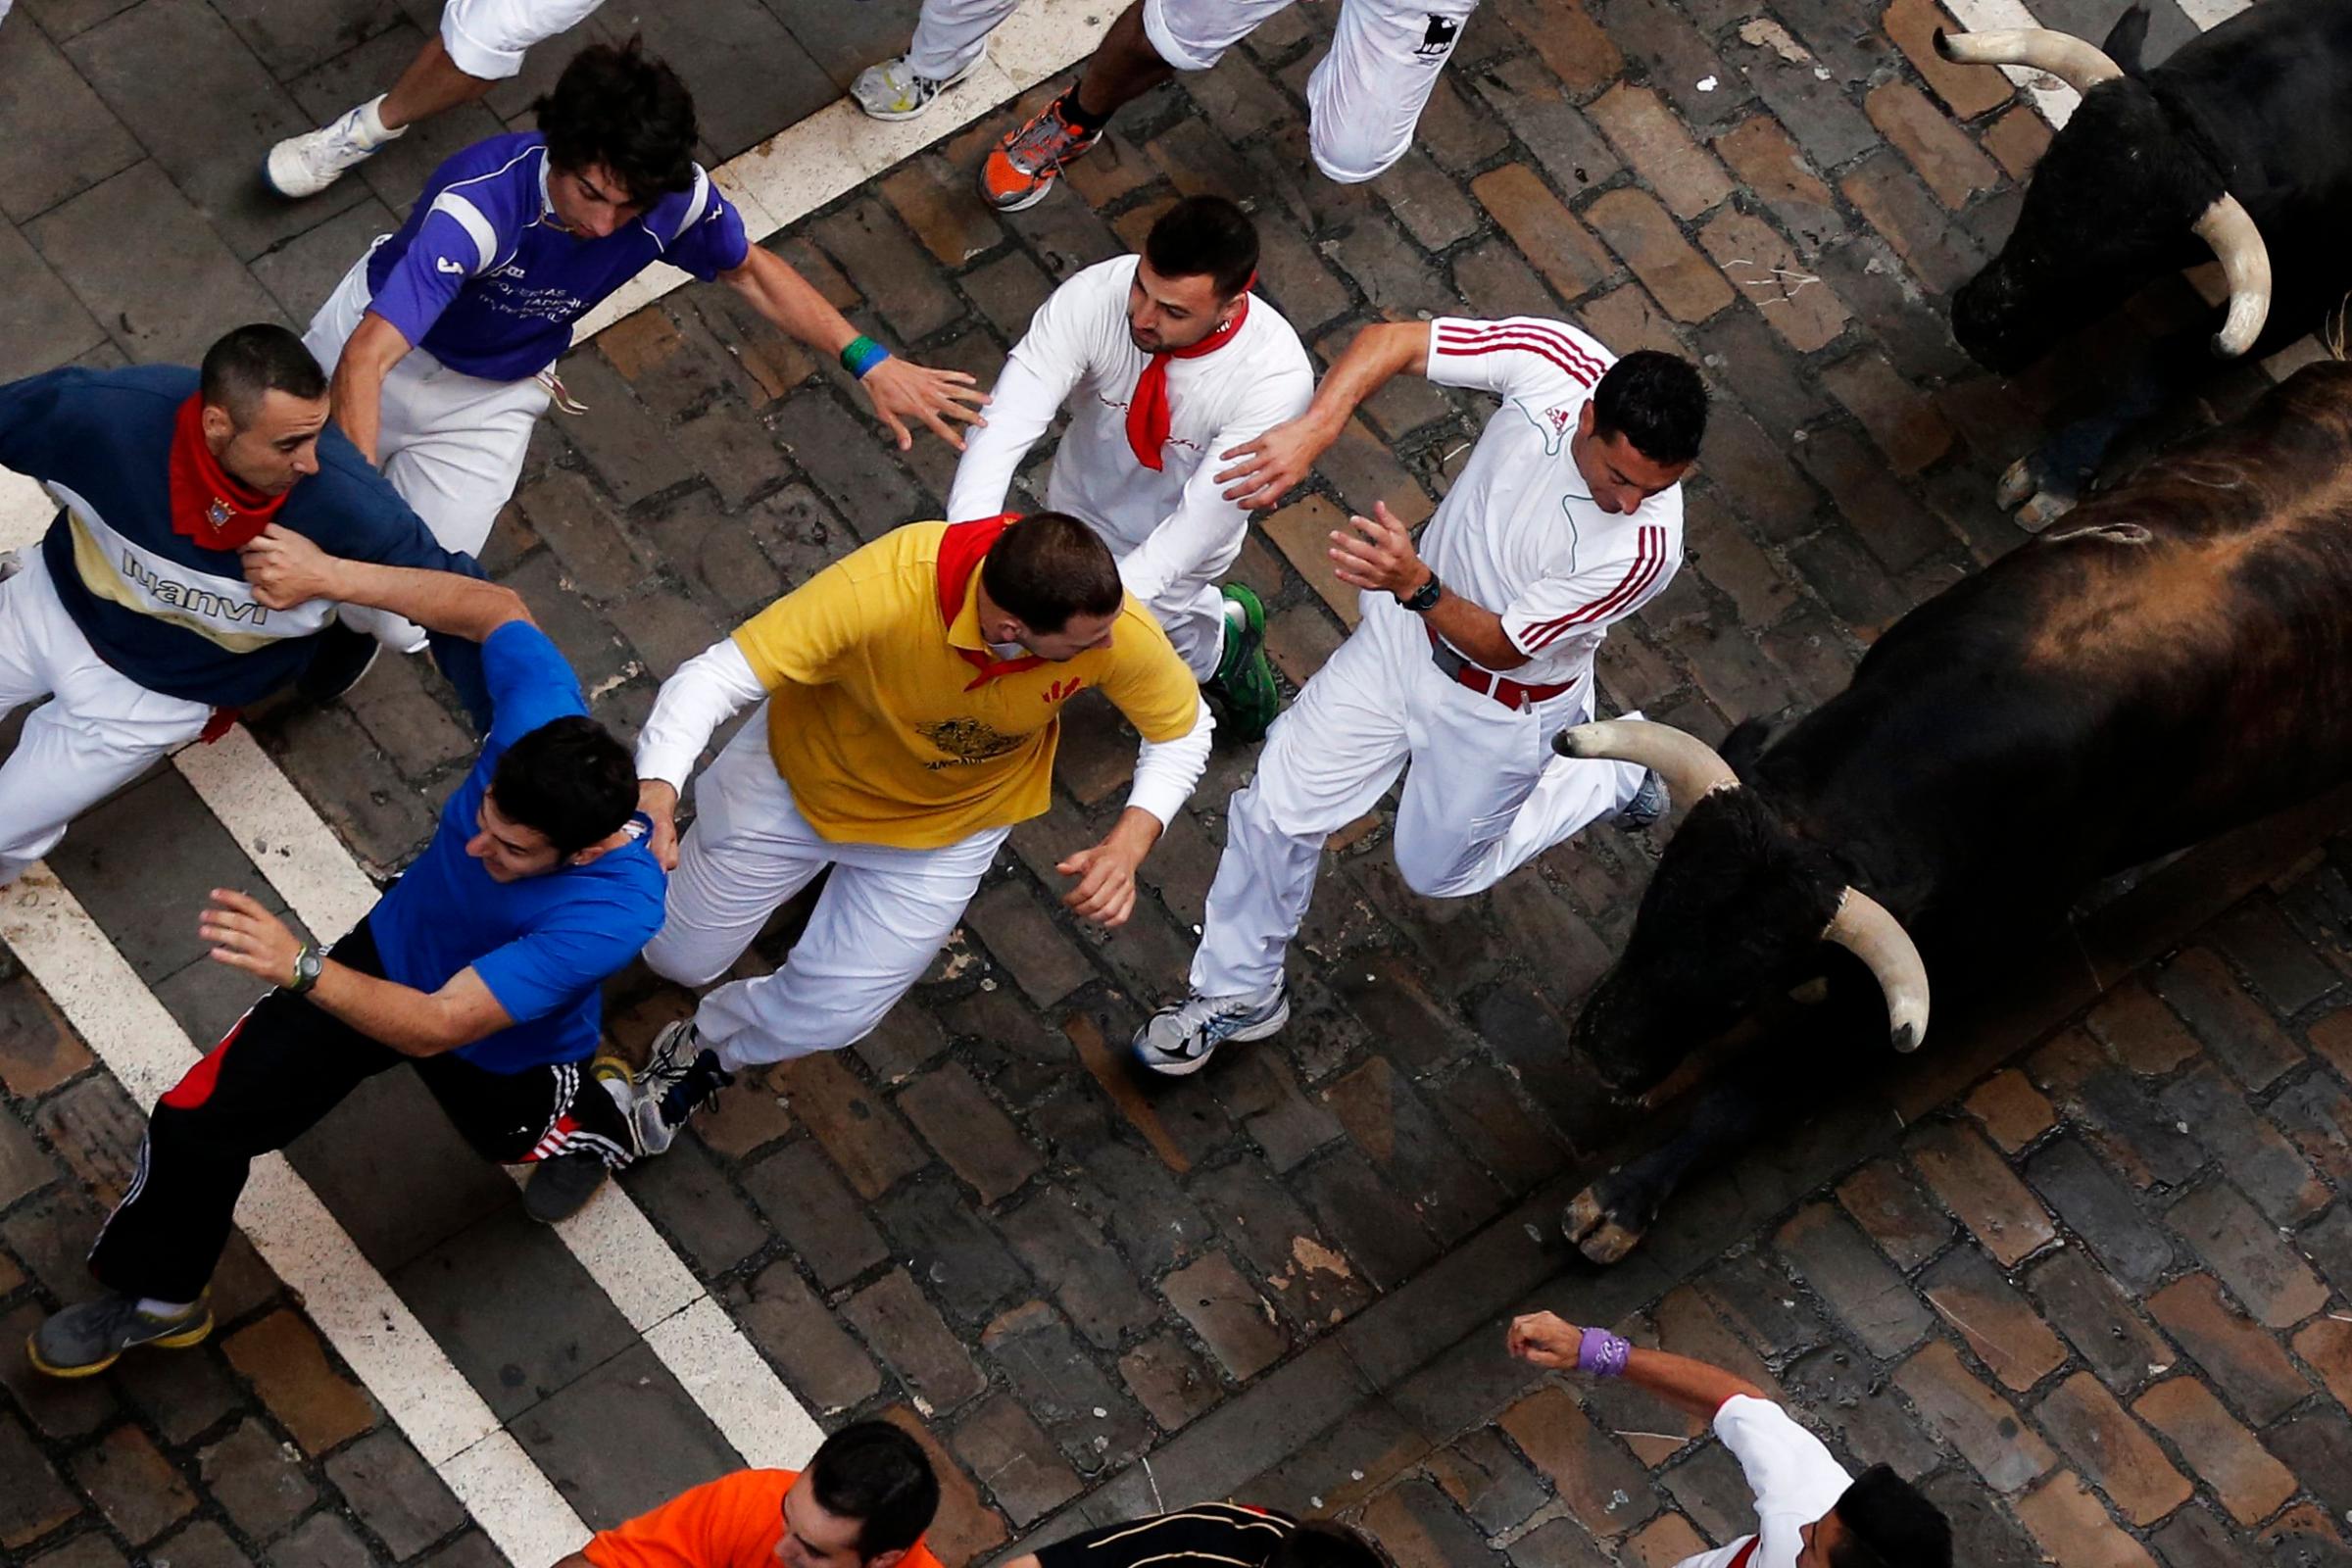 Revelers are chased by Dolores Aguirre's ranch fighting bulls during the running of the bulls of the San Fermin festival in Pamplona, Spain on July 8, 2014.